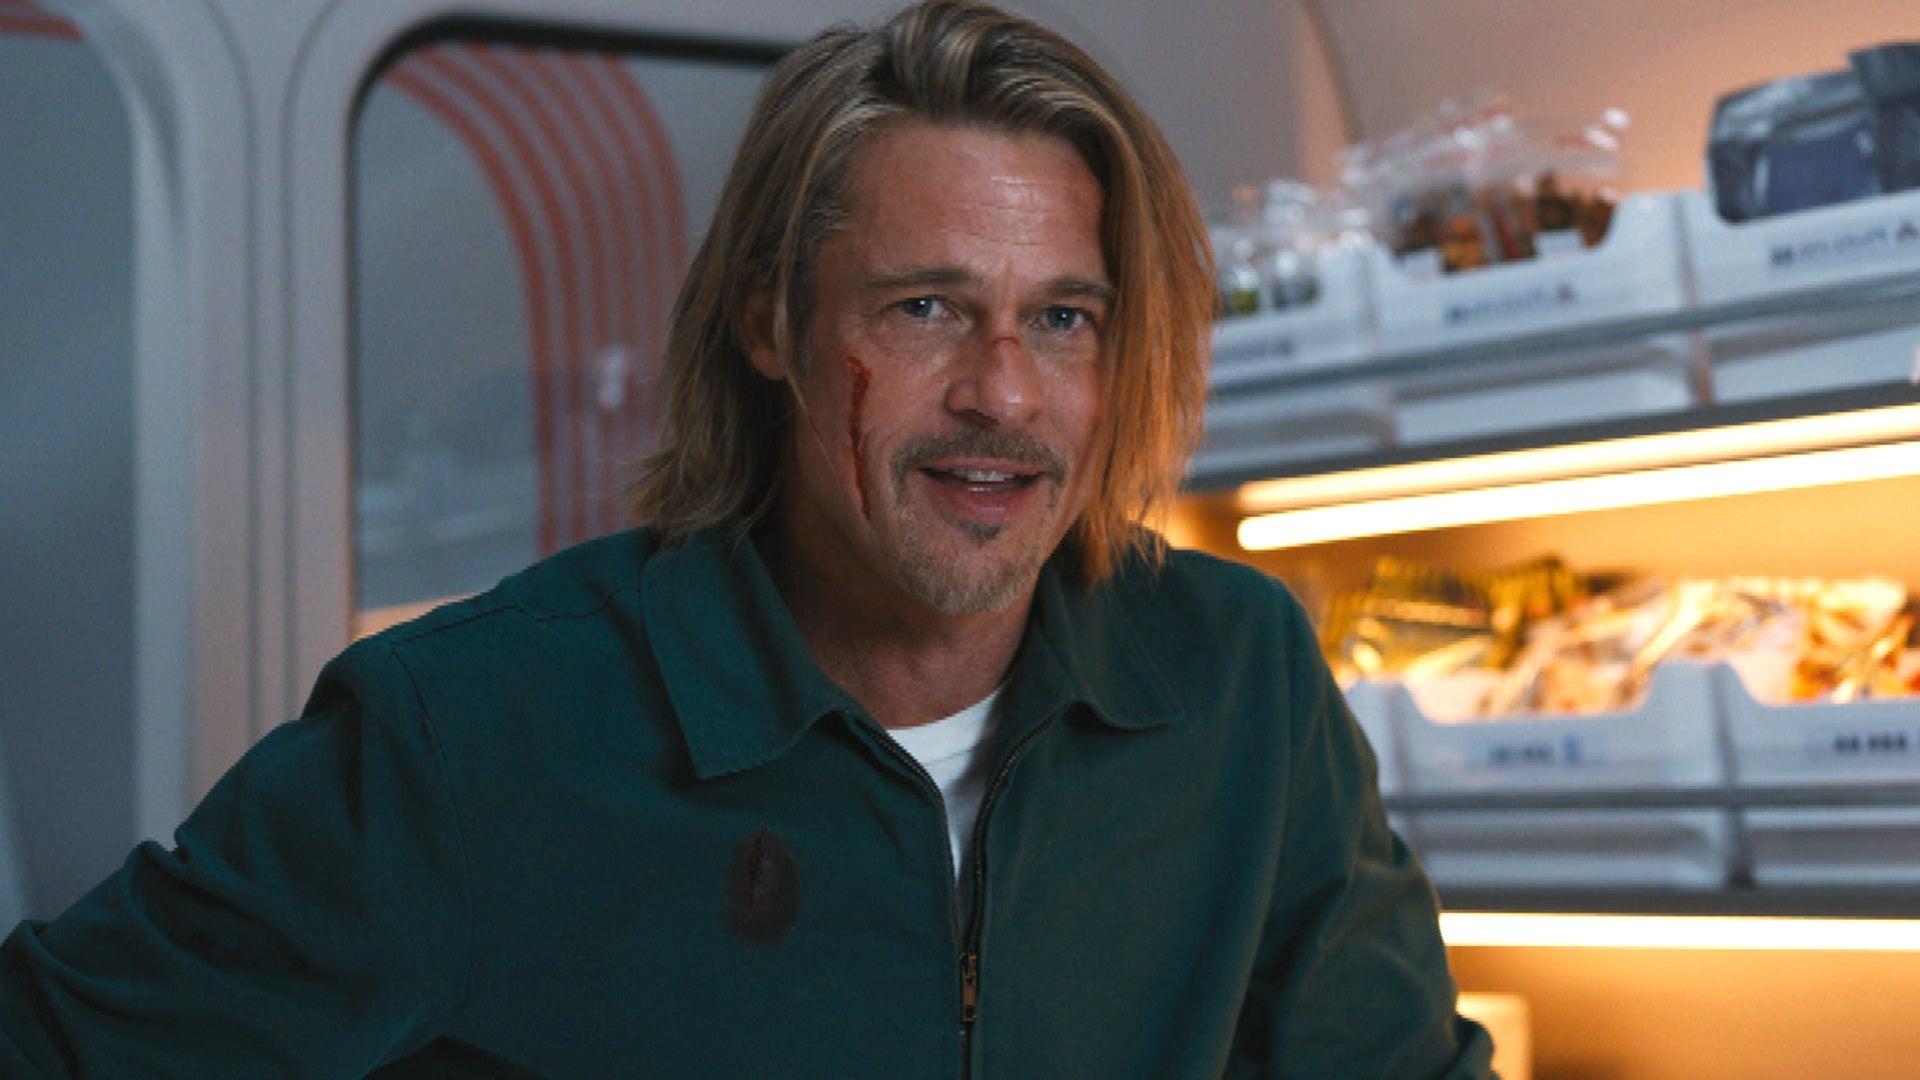 The action film Bullet Train starring Brad Pitt claimed the number one spot at the box office this weekend.